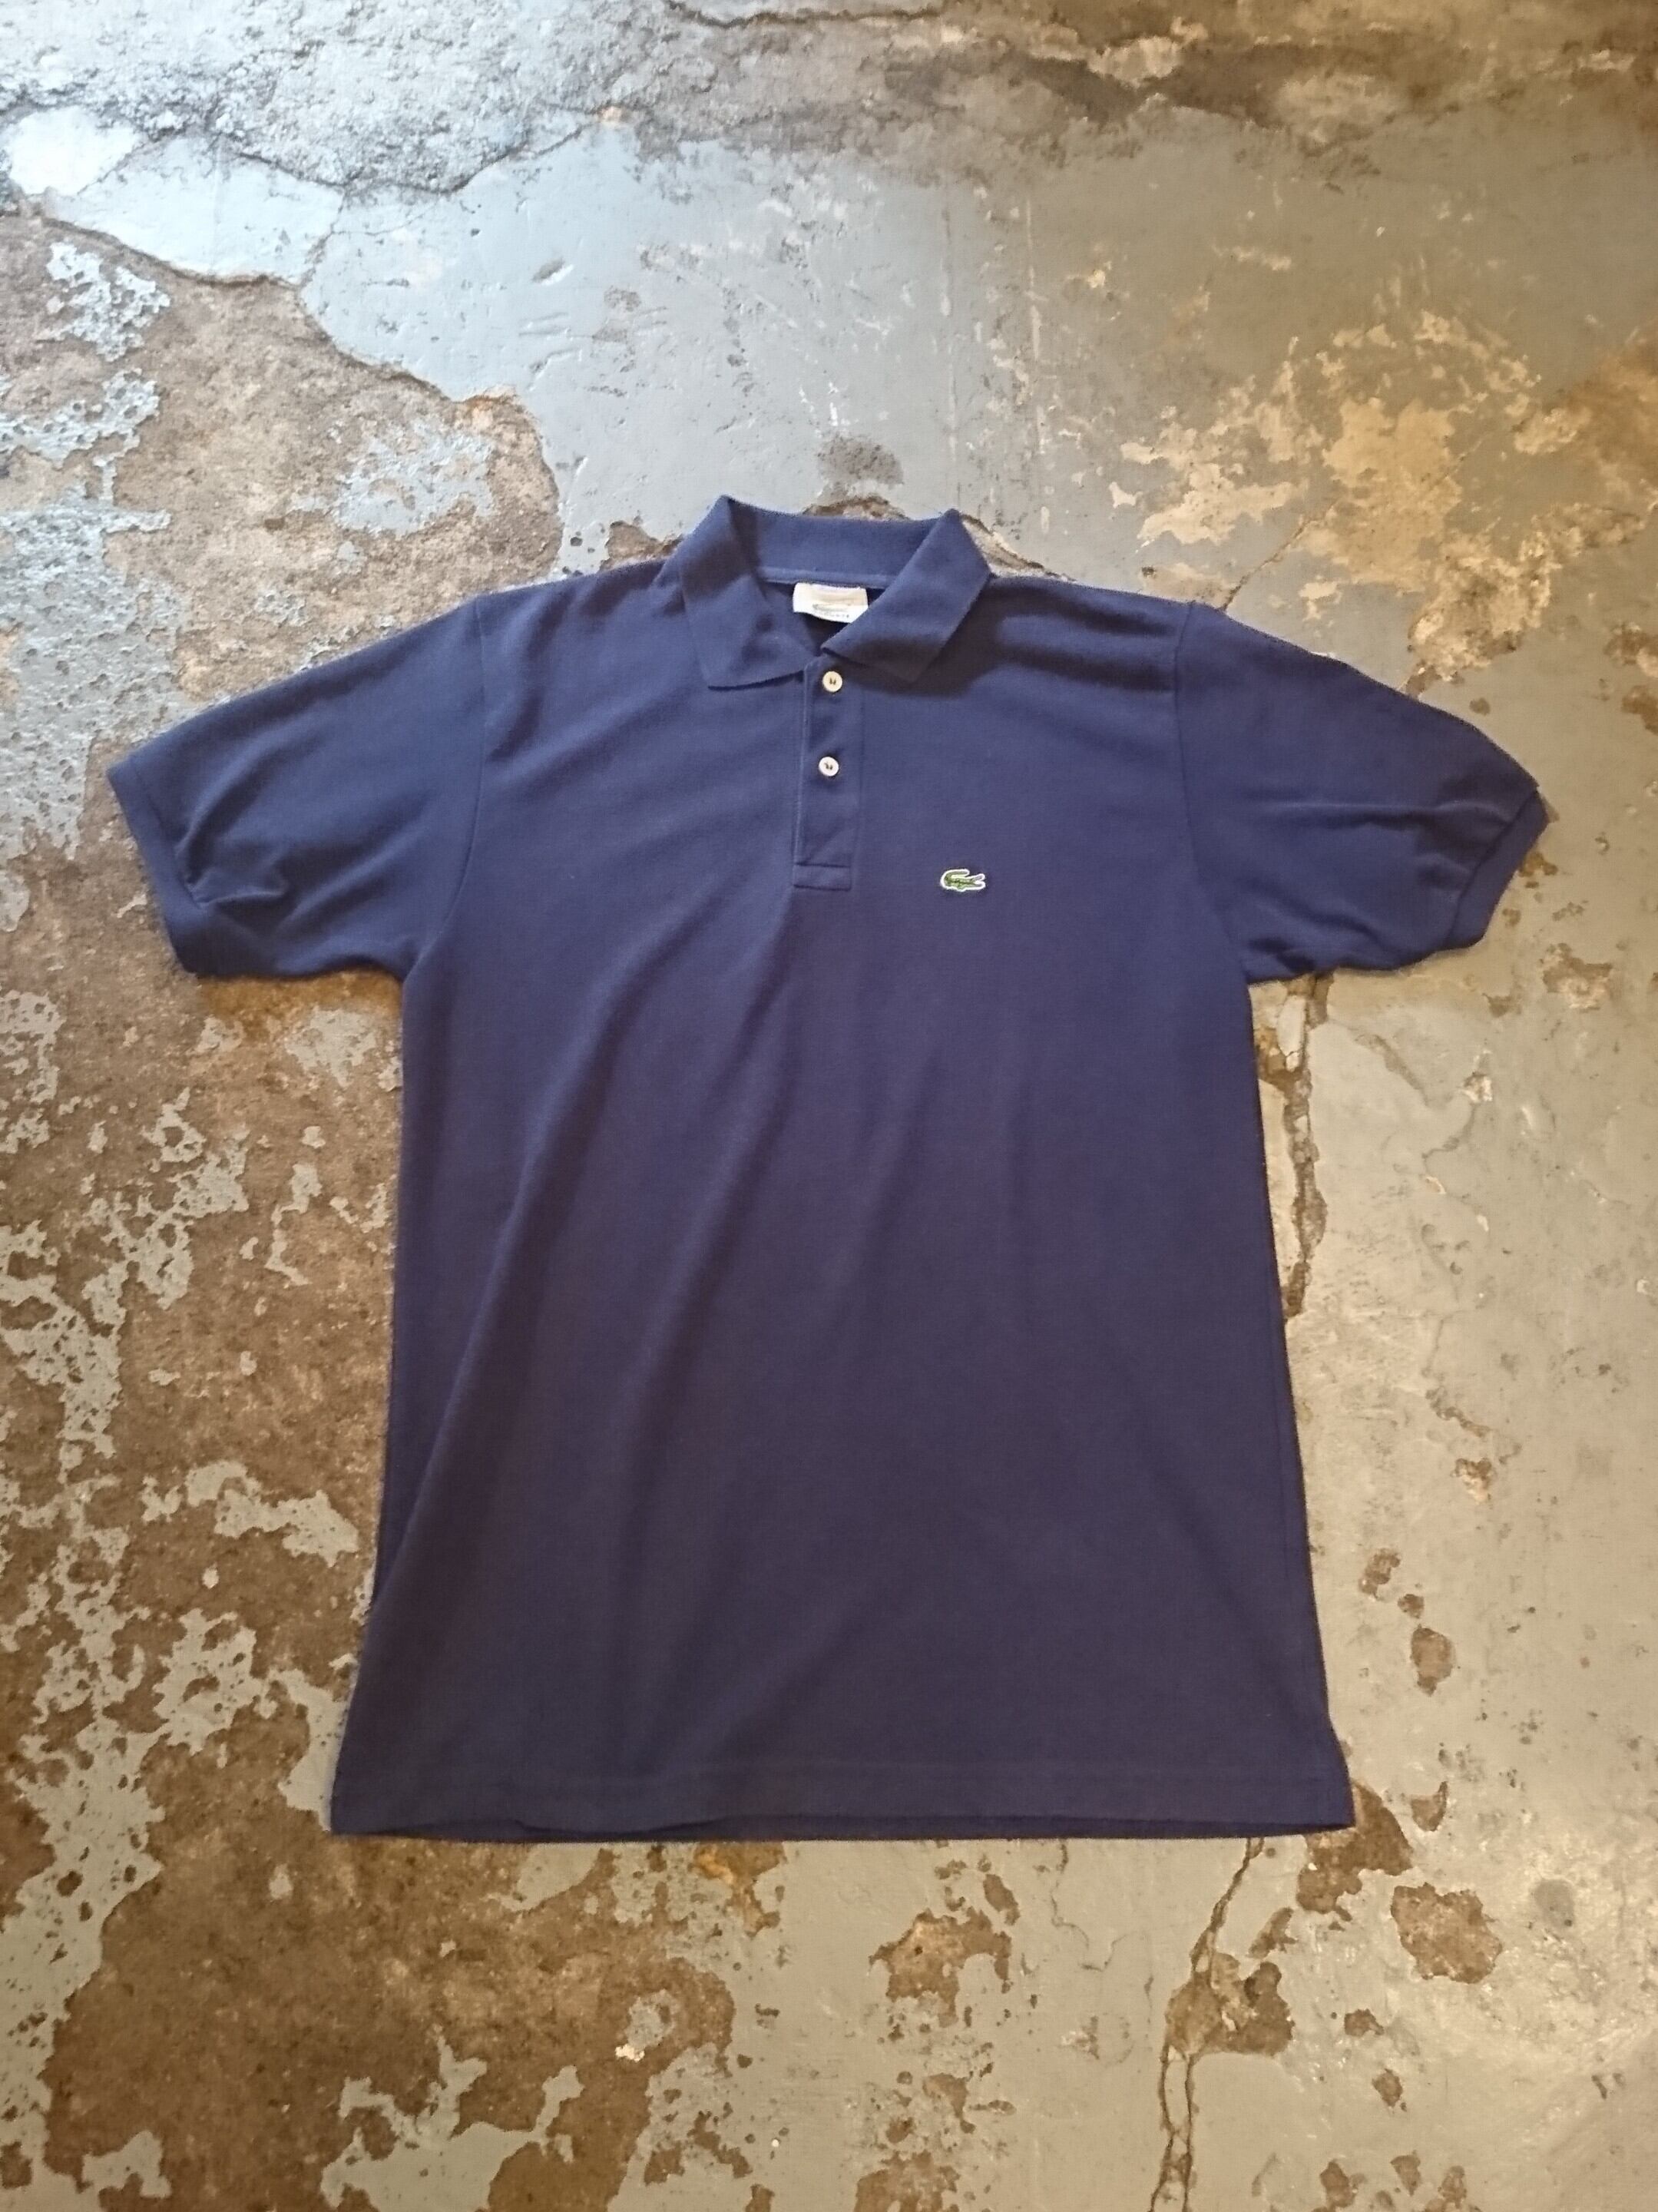 MADE IN FRANCE LACOSTE" POLO SHIRT Navy Color ⑤ | BOW & ARROW WEB STORE